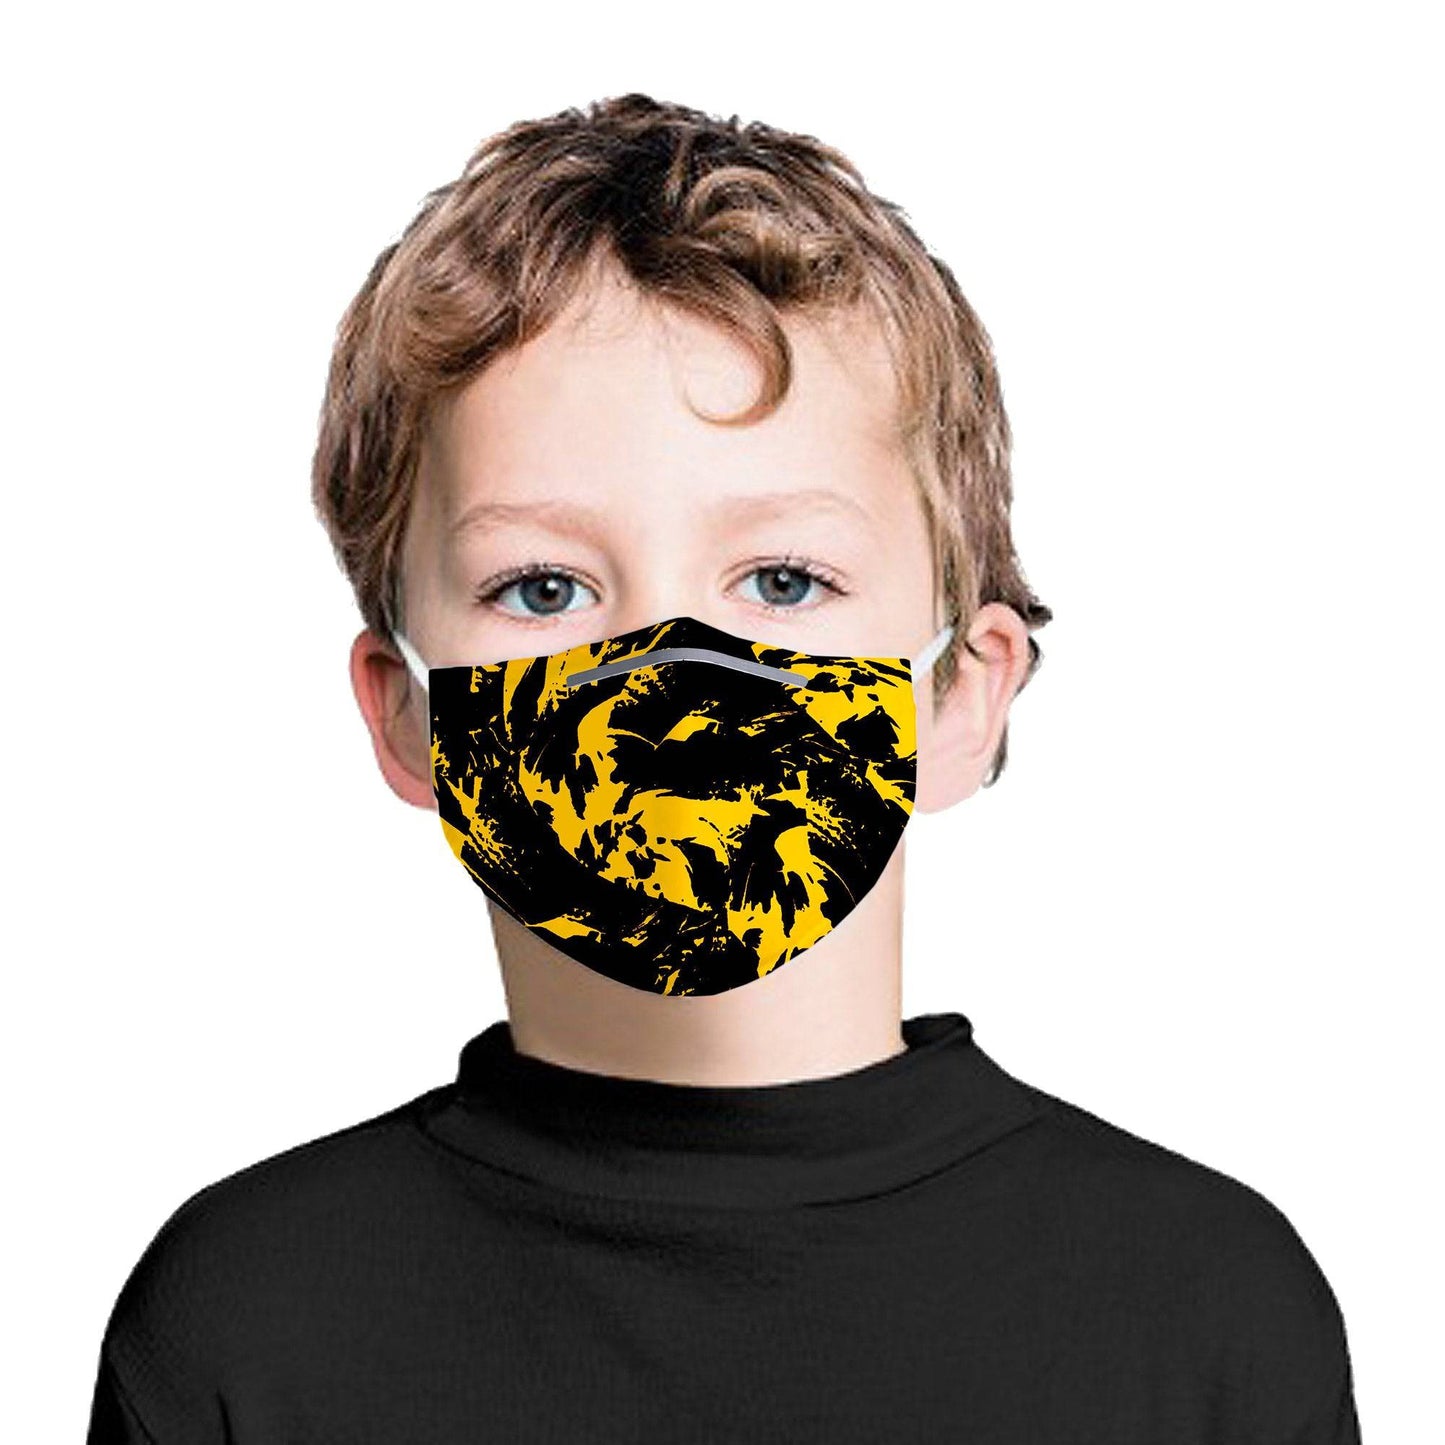 Black and Yellow Paint Splatter Kids Face Mask With (4) PM 2.5 Carbon Inserts, Big Tex Funkadelic, | iEDM